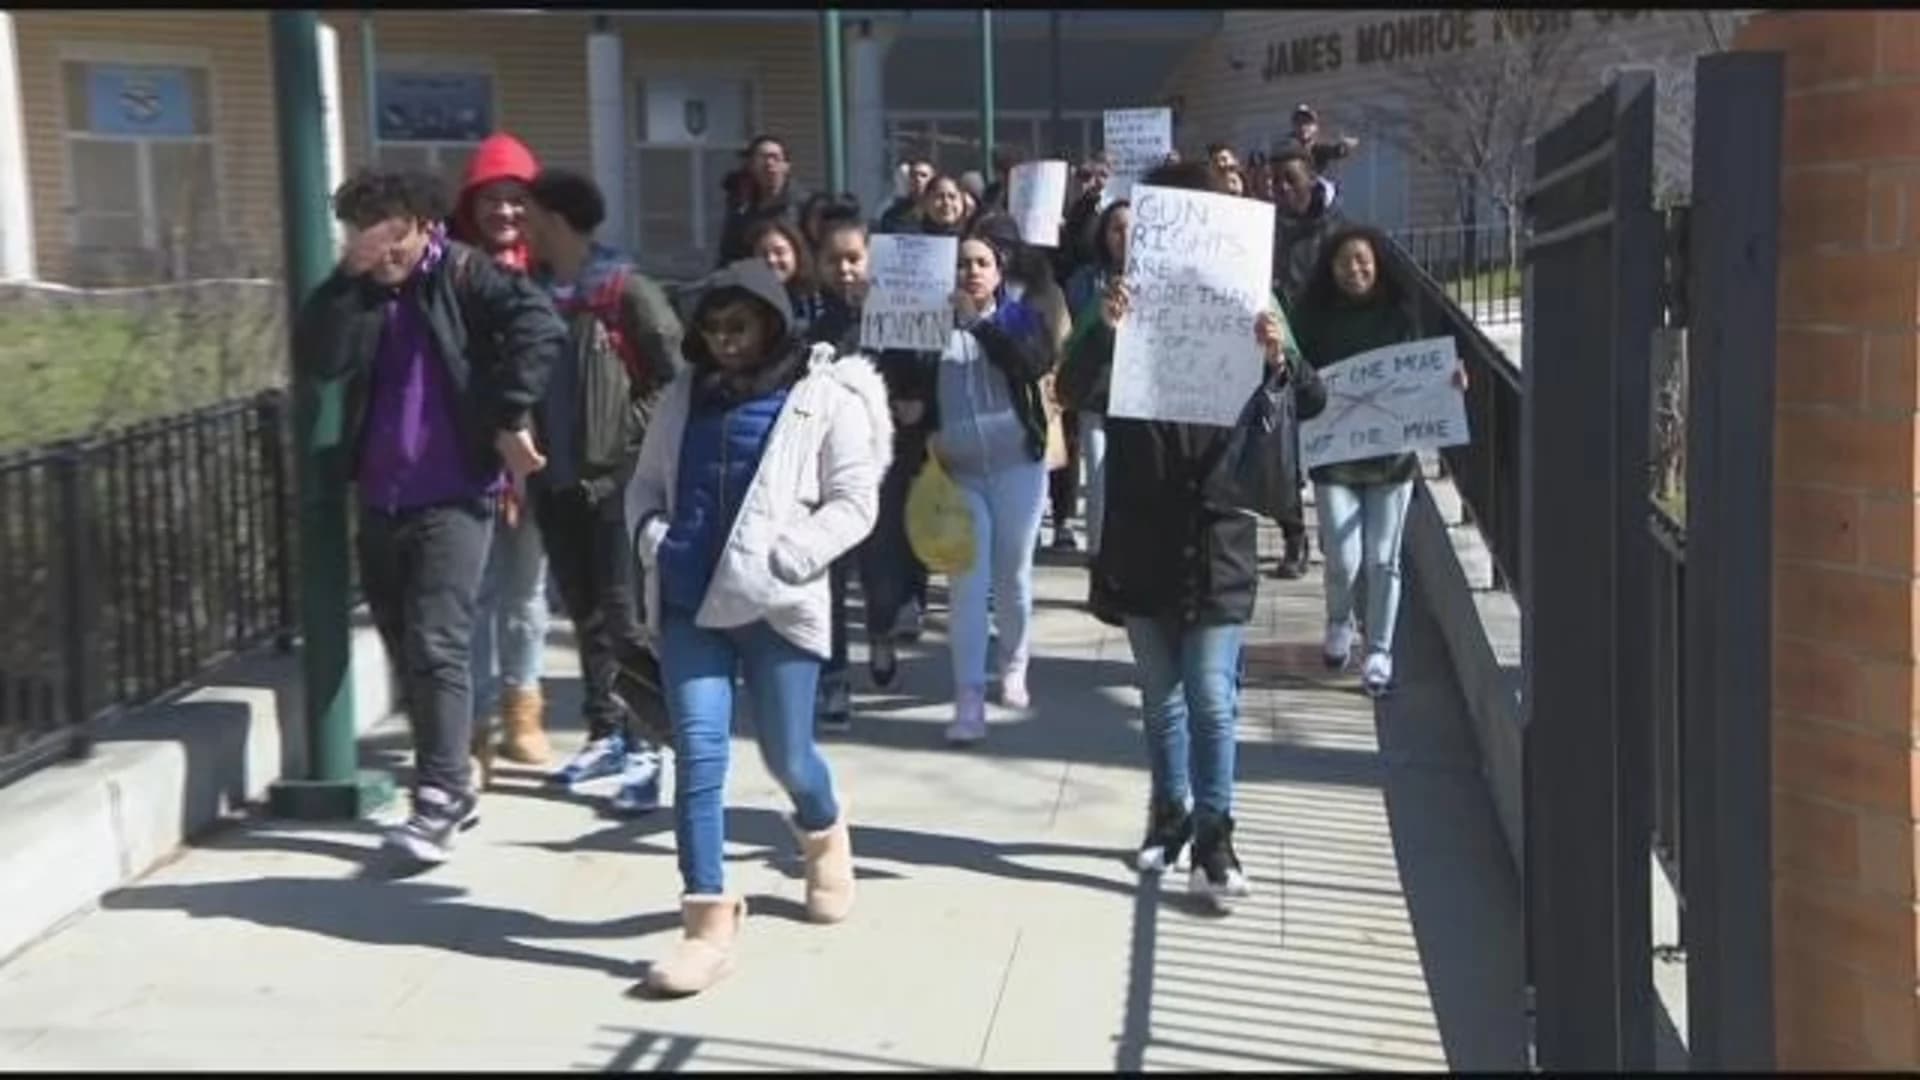 NYC students protesting gun violence walk out of class